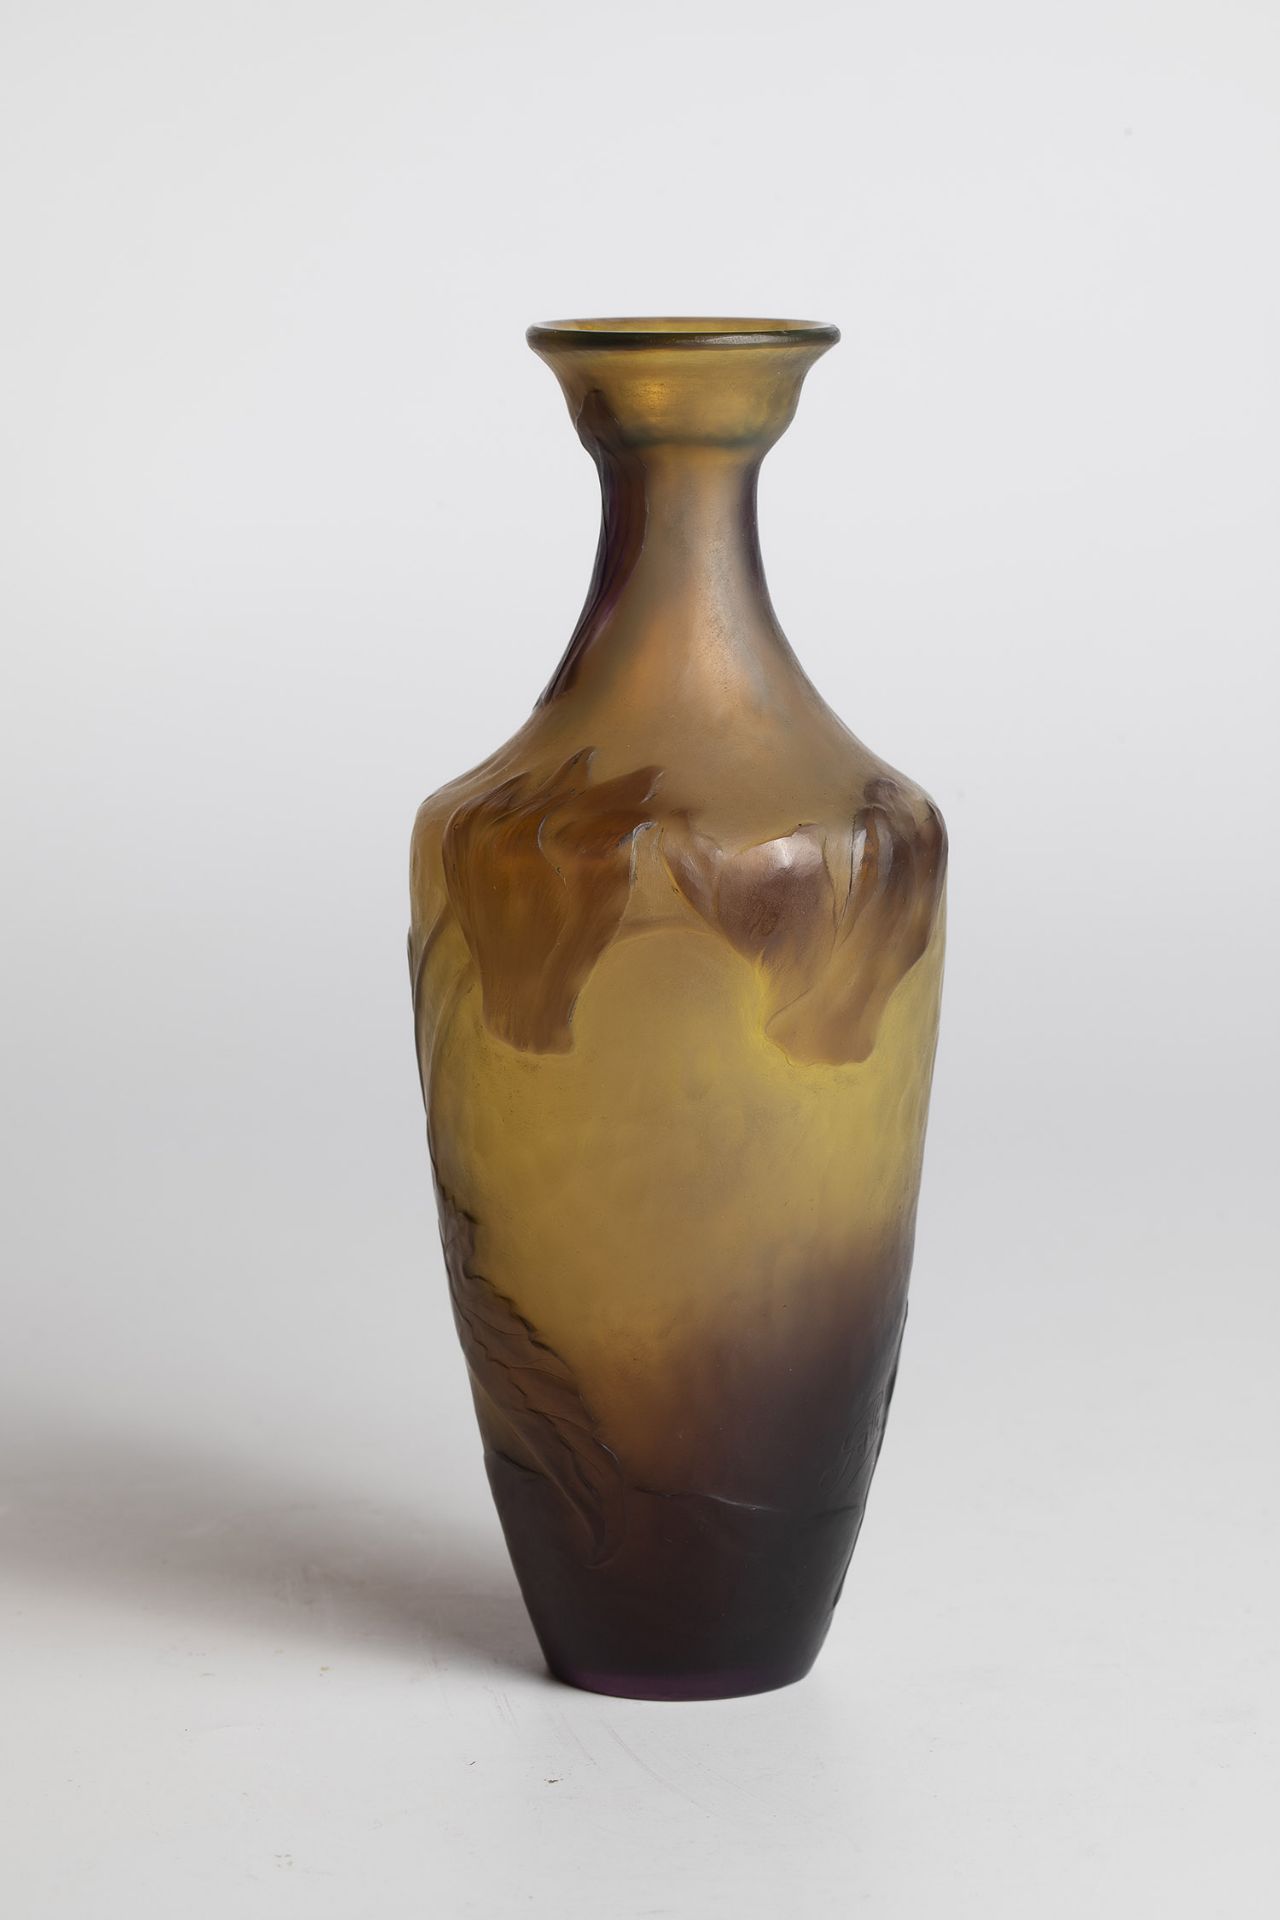 Rare Vase with Cyclamen Emile Galle, Nancy, circa 1900 Colorless glass, yellow opalescent underlay - Image 2 of 2